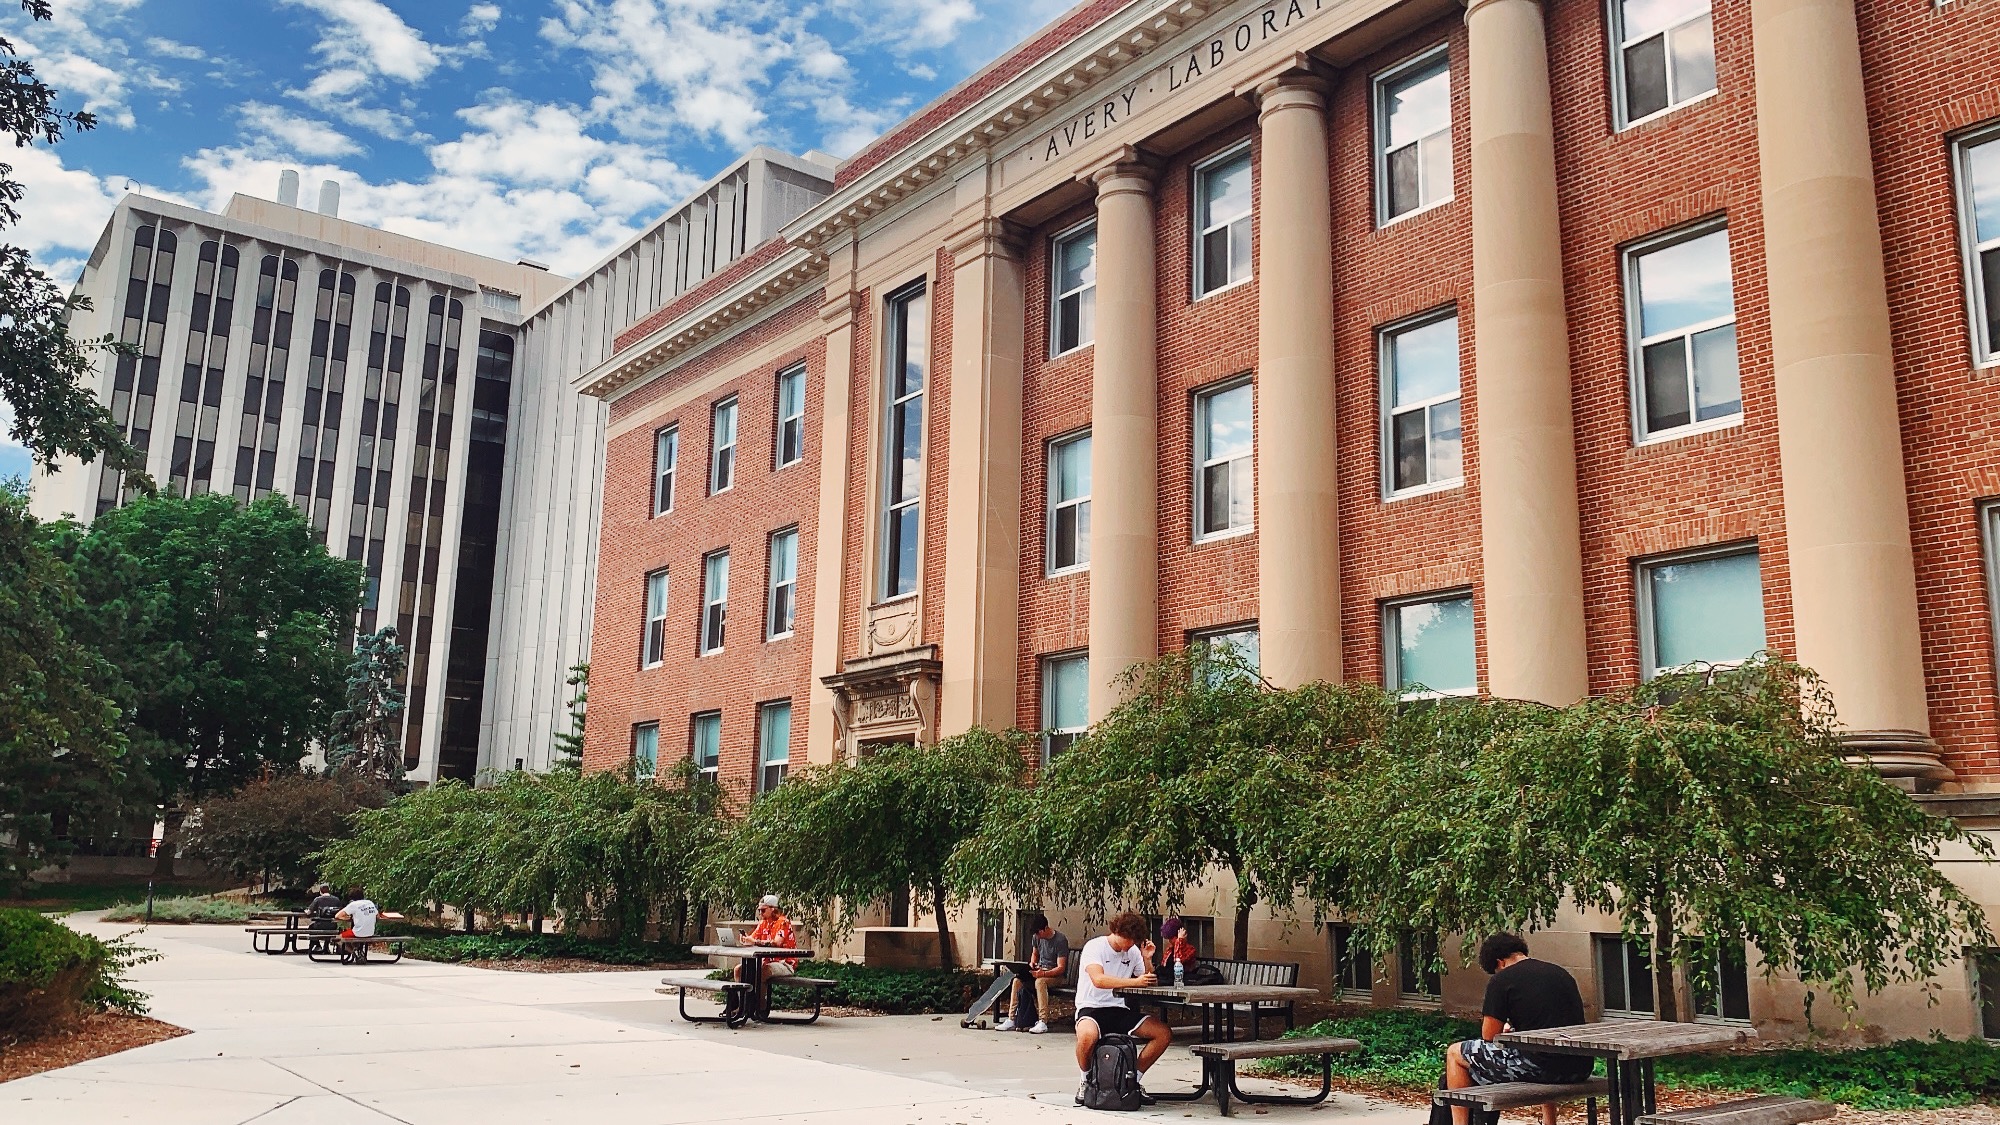 The School of Computing, located in Avery Hall.